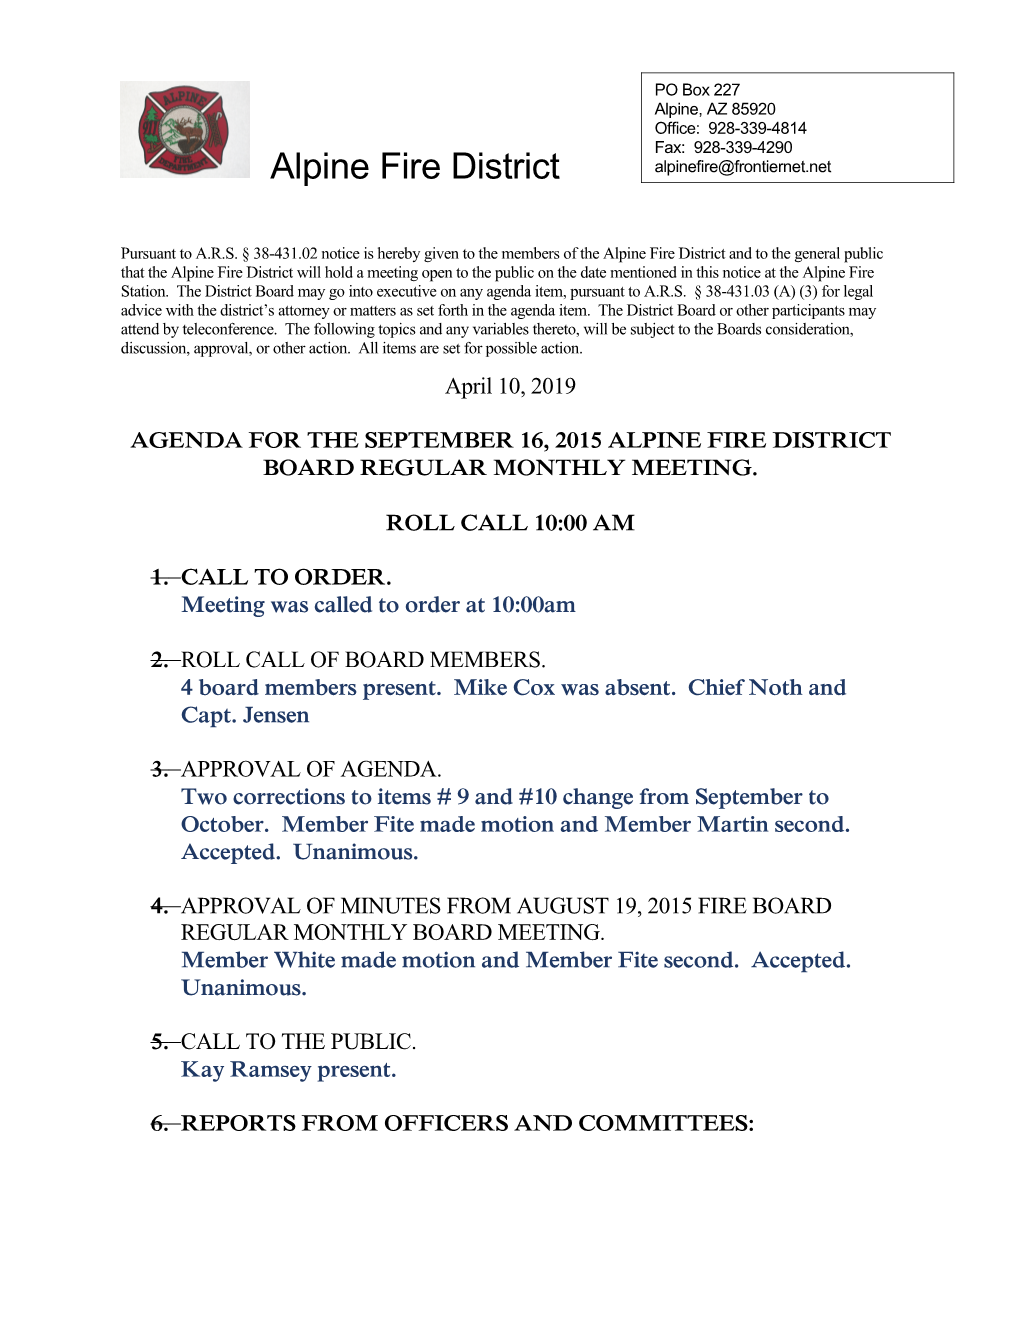 Agenda for Theseptember 16, 2015 Alpine Fire District Board Regular Monthly Meeting